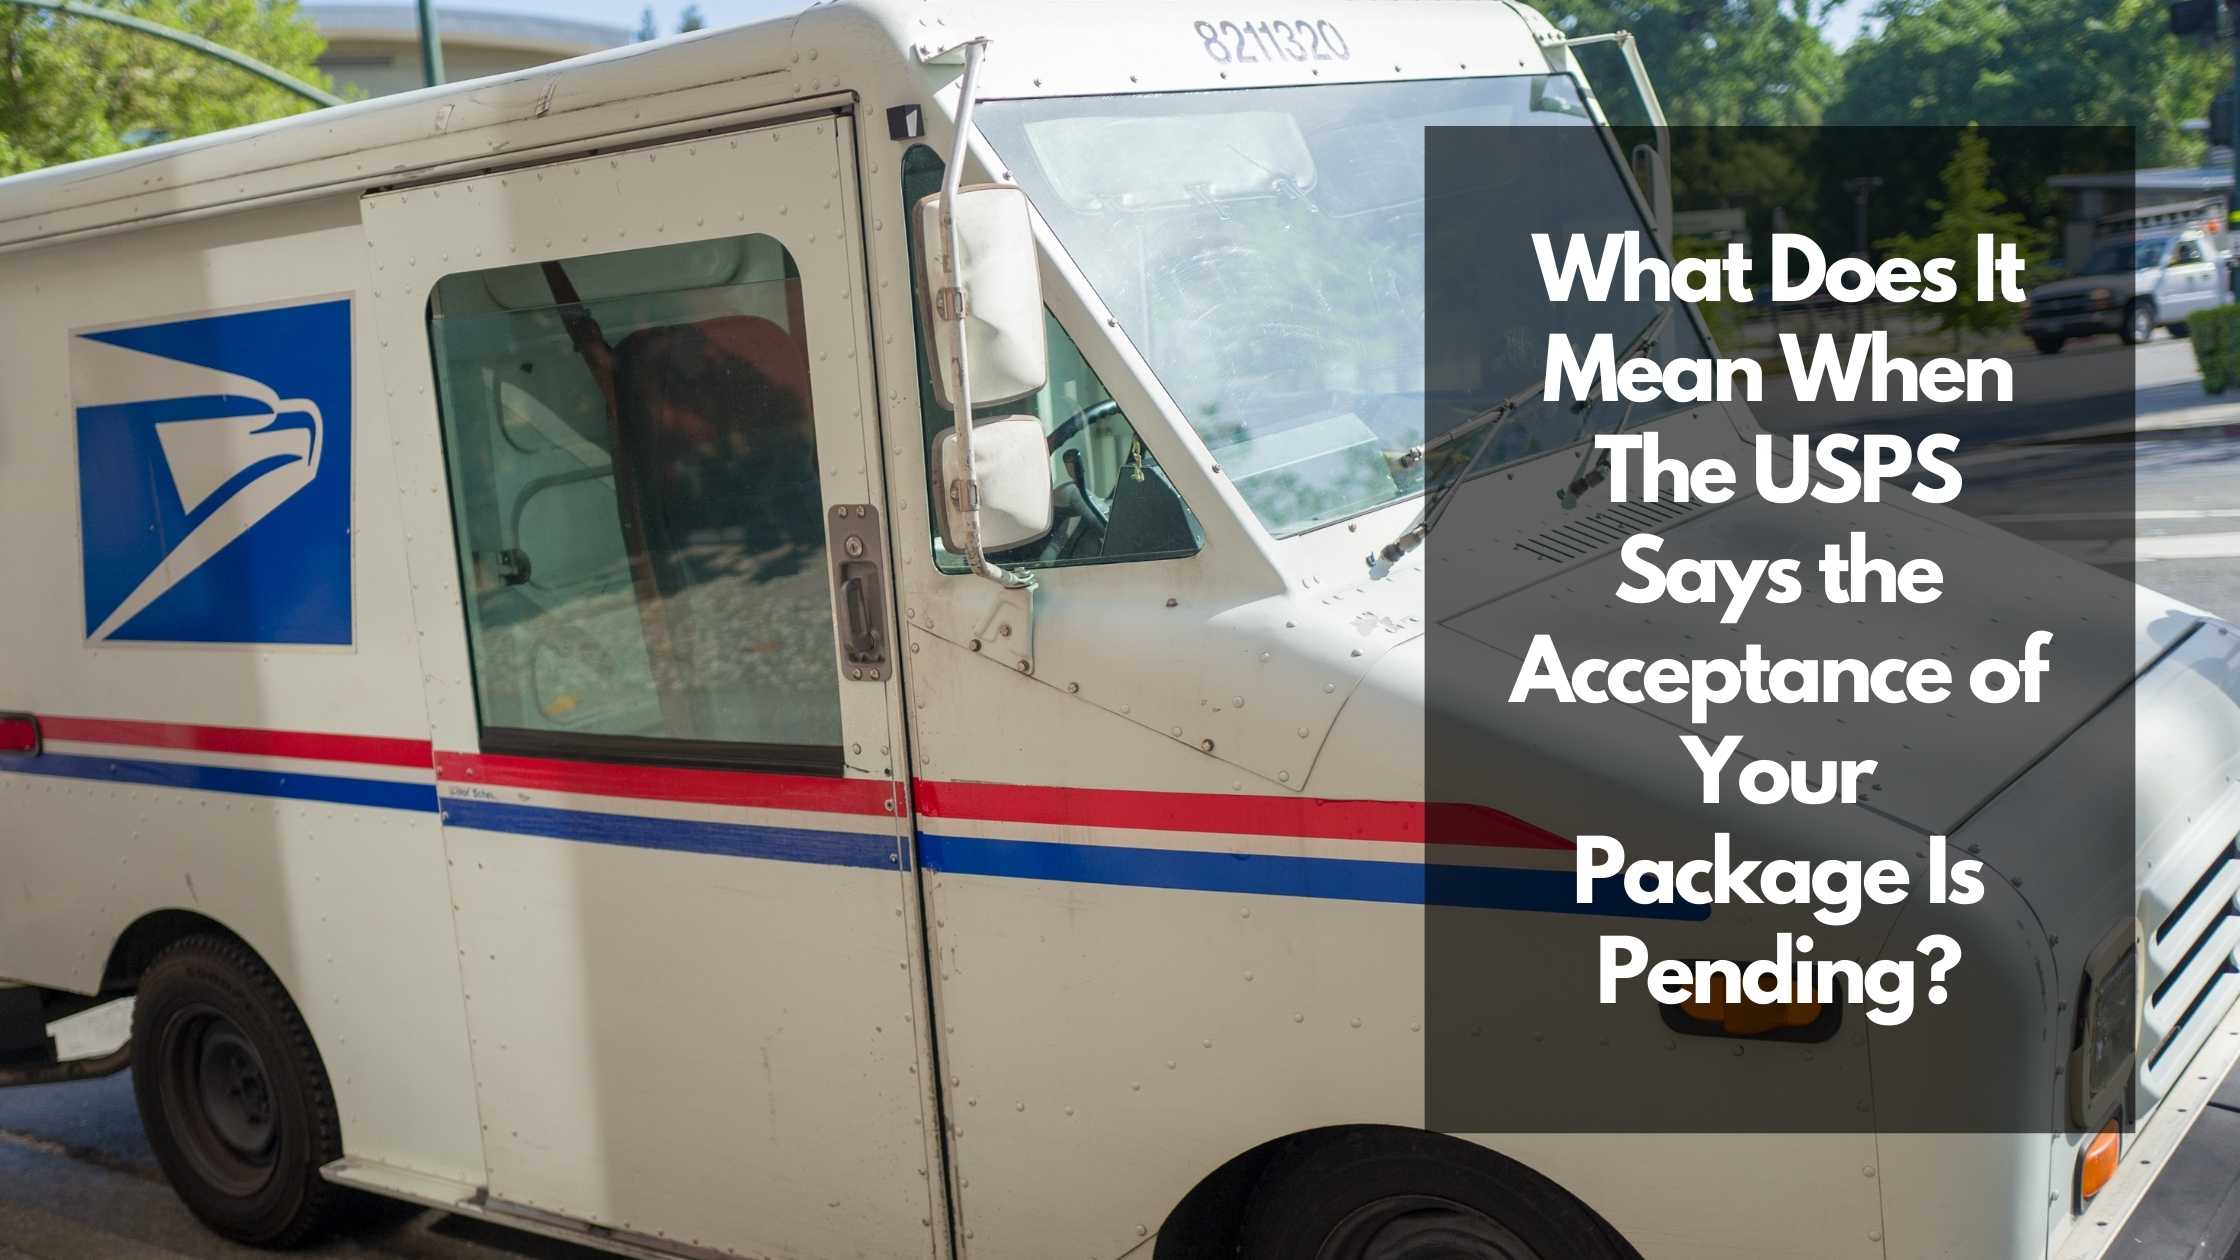 What Does It Mean When the USPS Says the Acceptance of Your Package Is Pending?